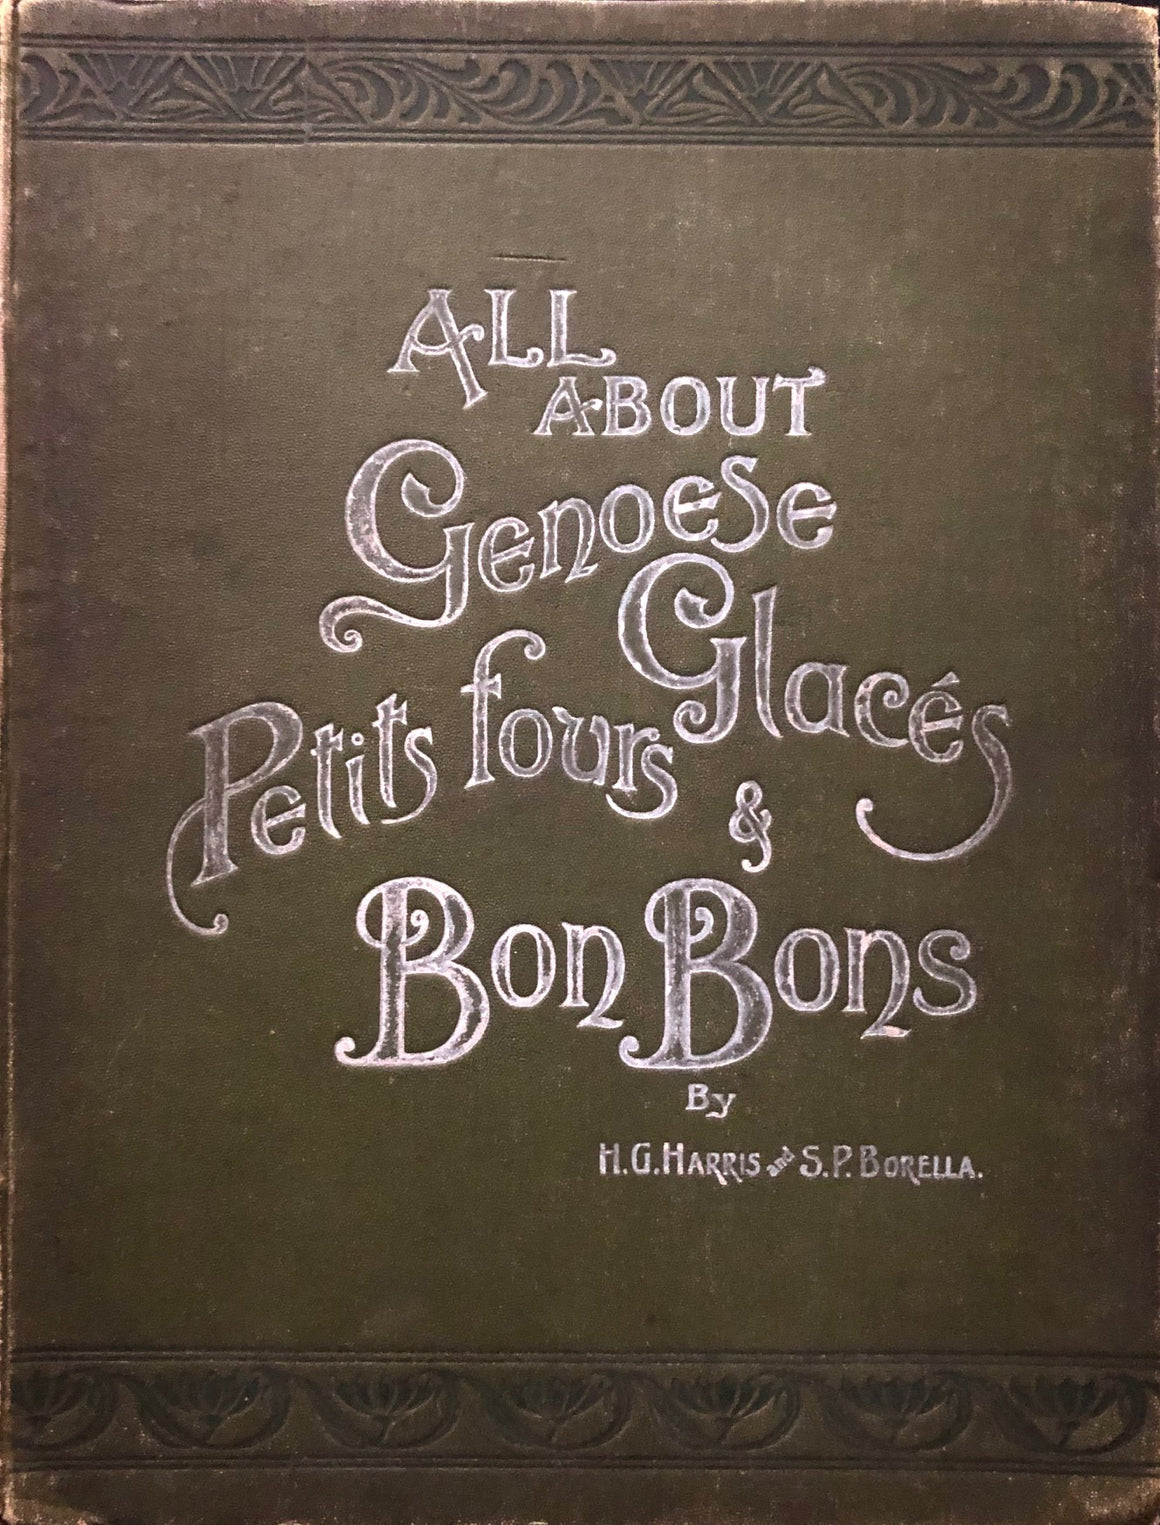 (*NEW ARRIVAL*) (Confectionery) Harris, H.G. & S.P. Borella. All About Genoese, Glaces, Petits Fours & Bon Bons.